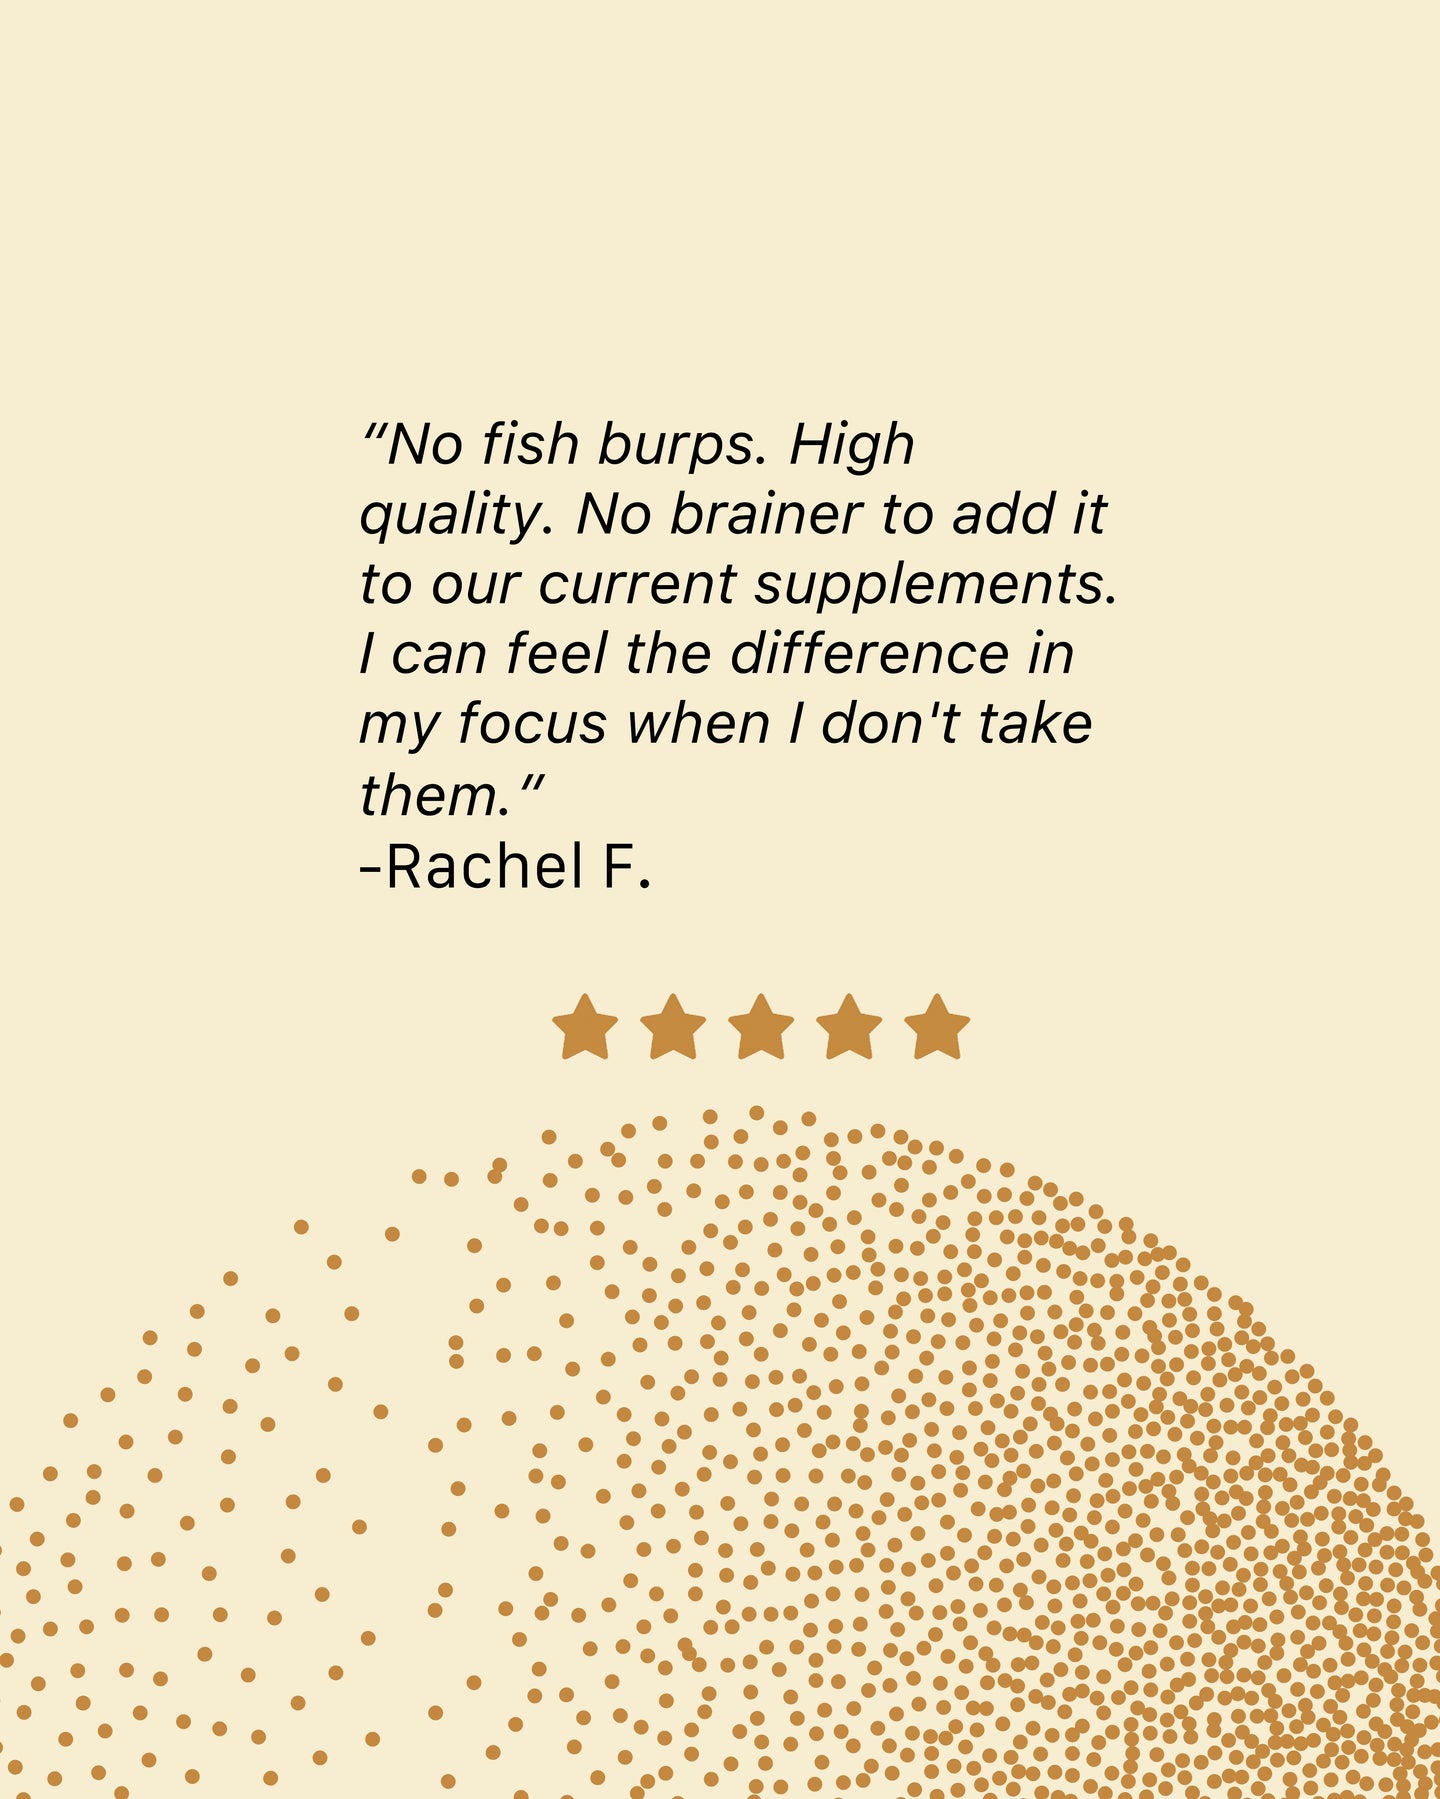 A review left by Rachel F No fish burps High  quality No brainer to add it to our current supplements I can feel the difference in my focus when I don't take them